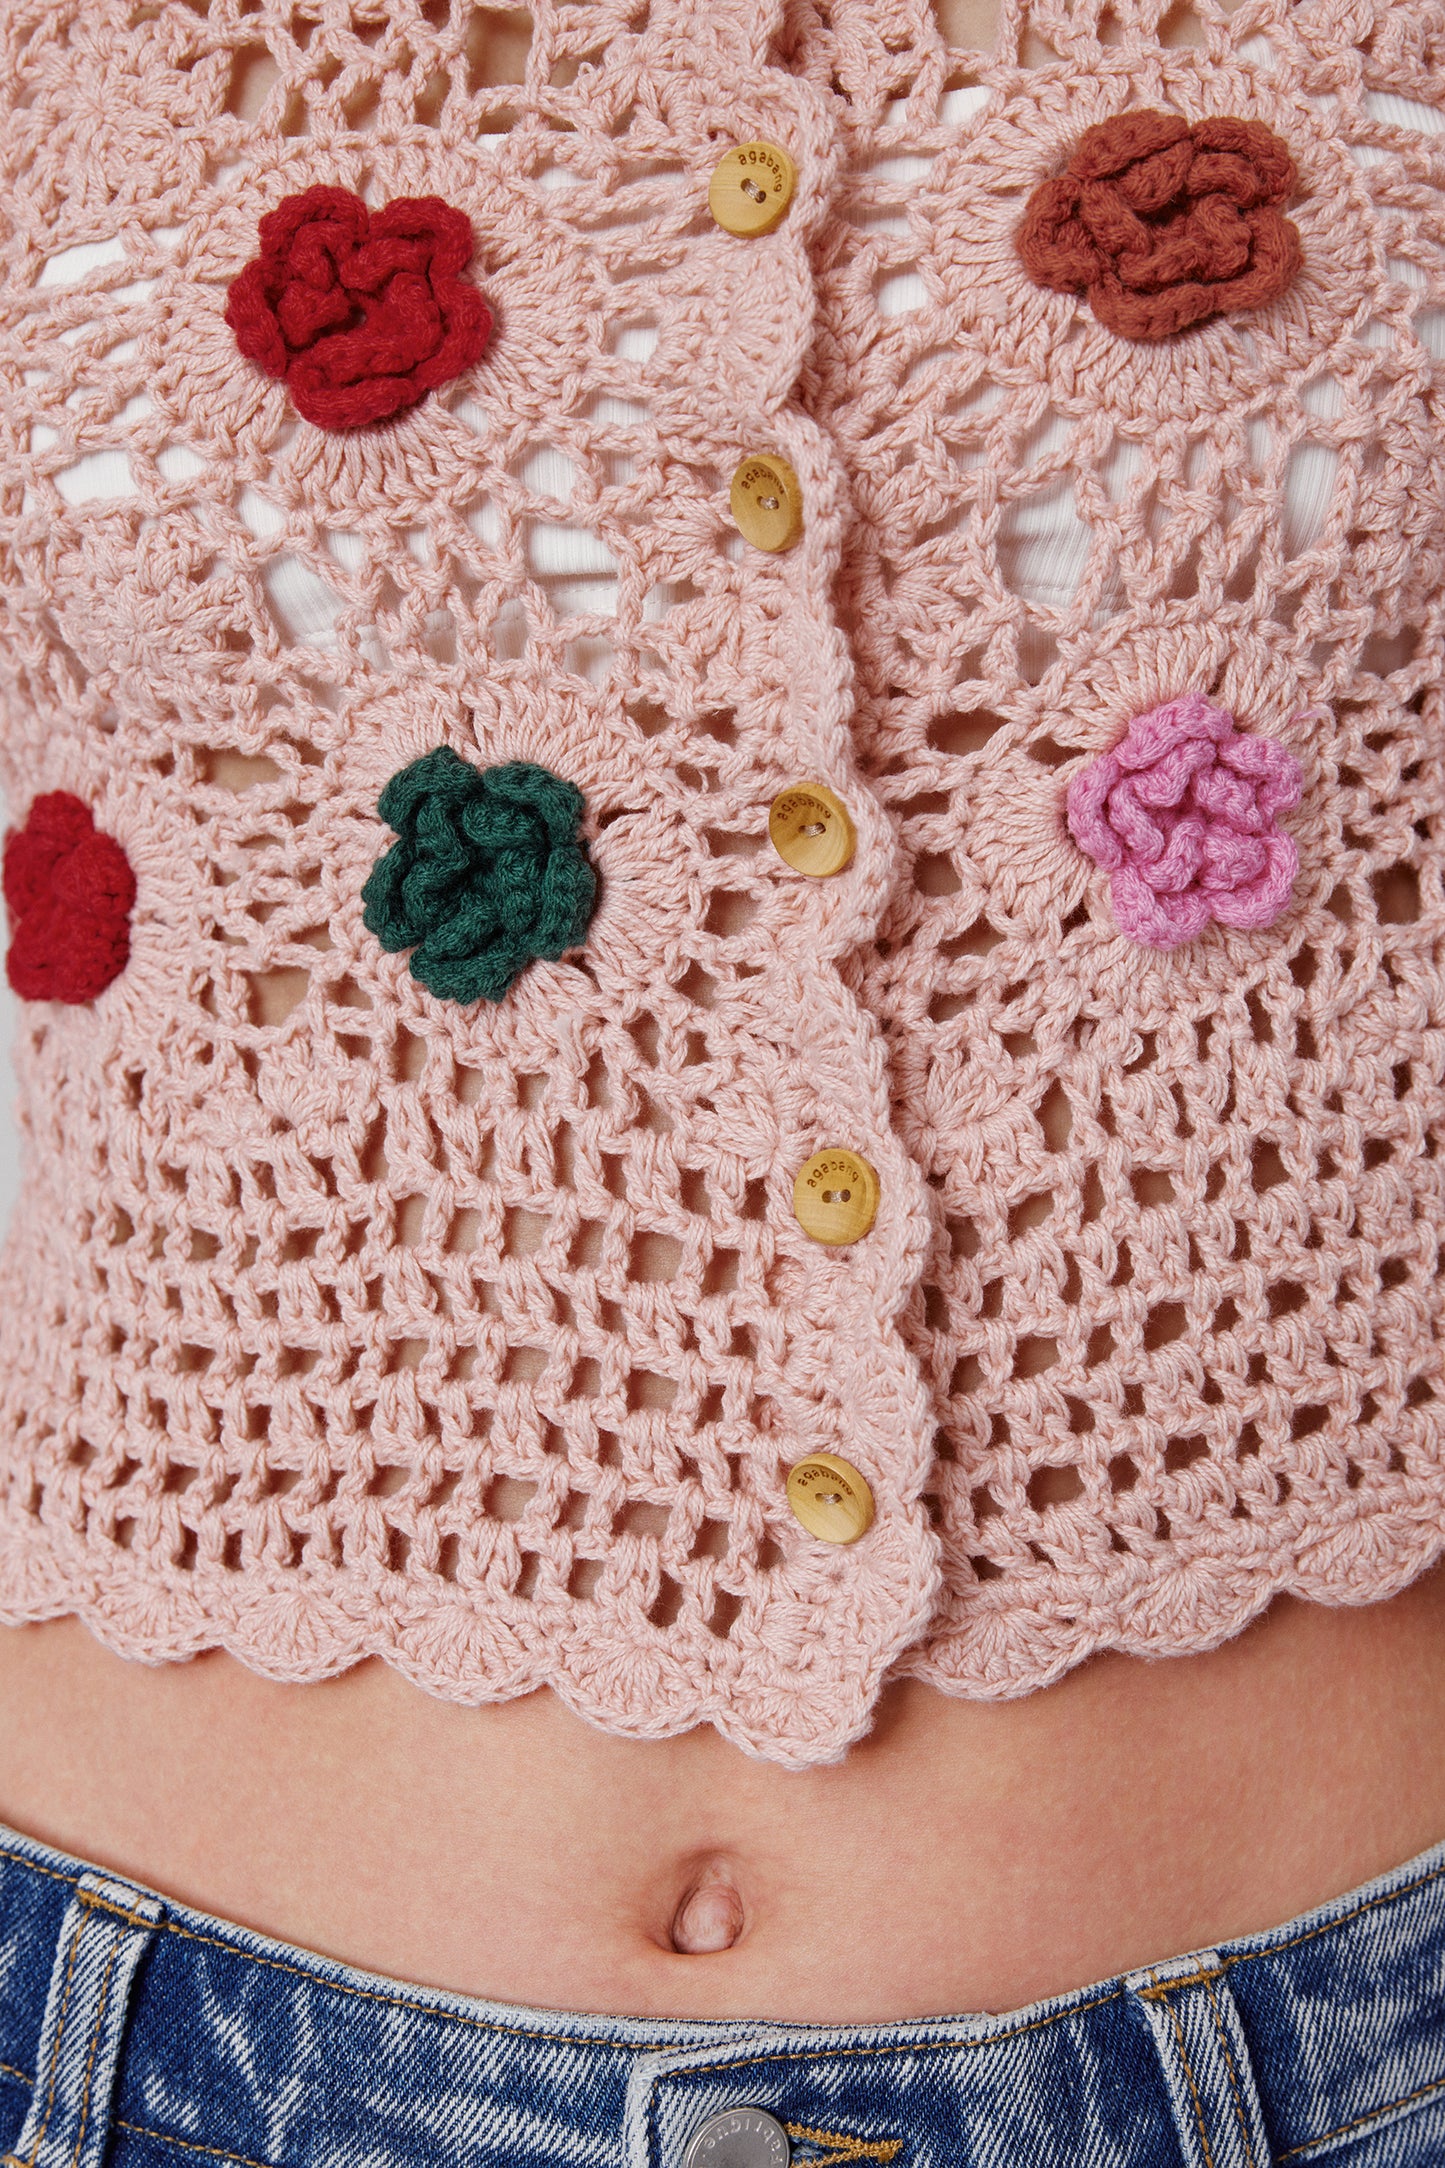 Alice Handcrafted Crochet Flower Knit Top in Cotton